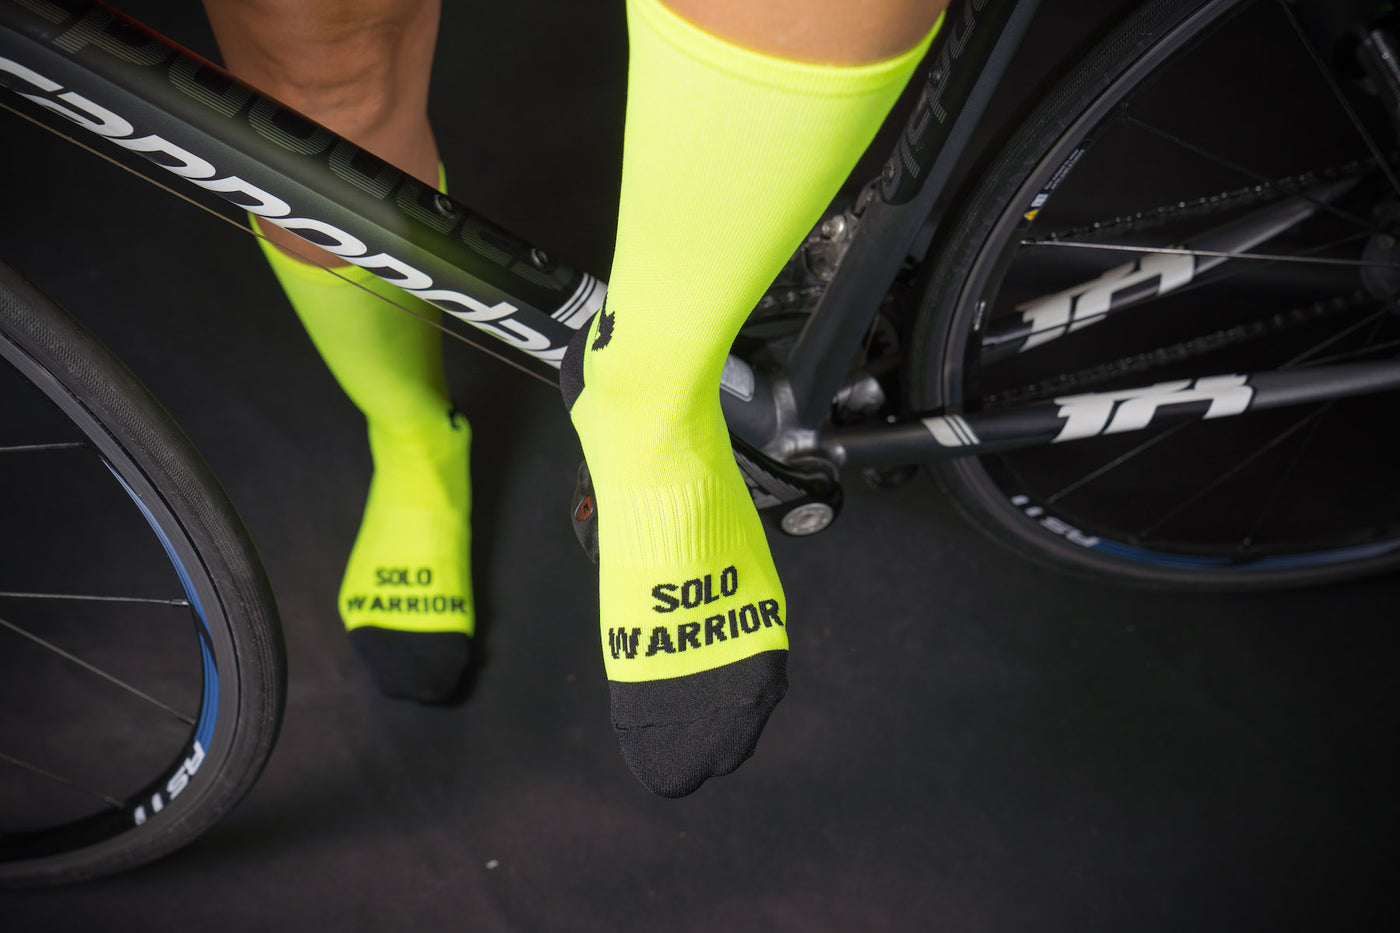 Solid Neon Green 6" Men's & Women's cycling socks with compression.